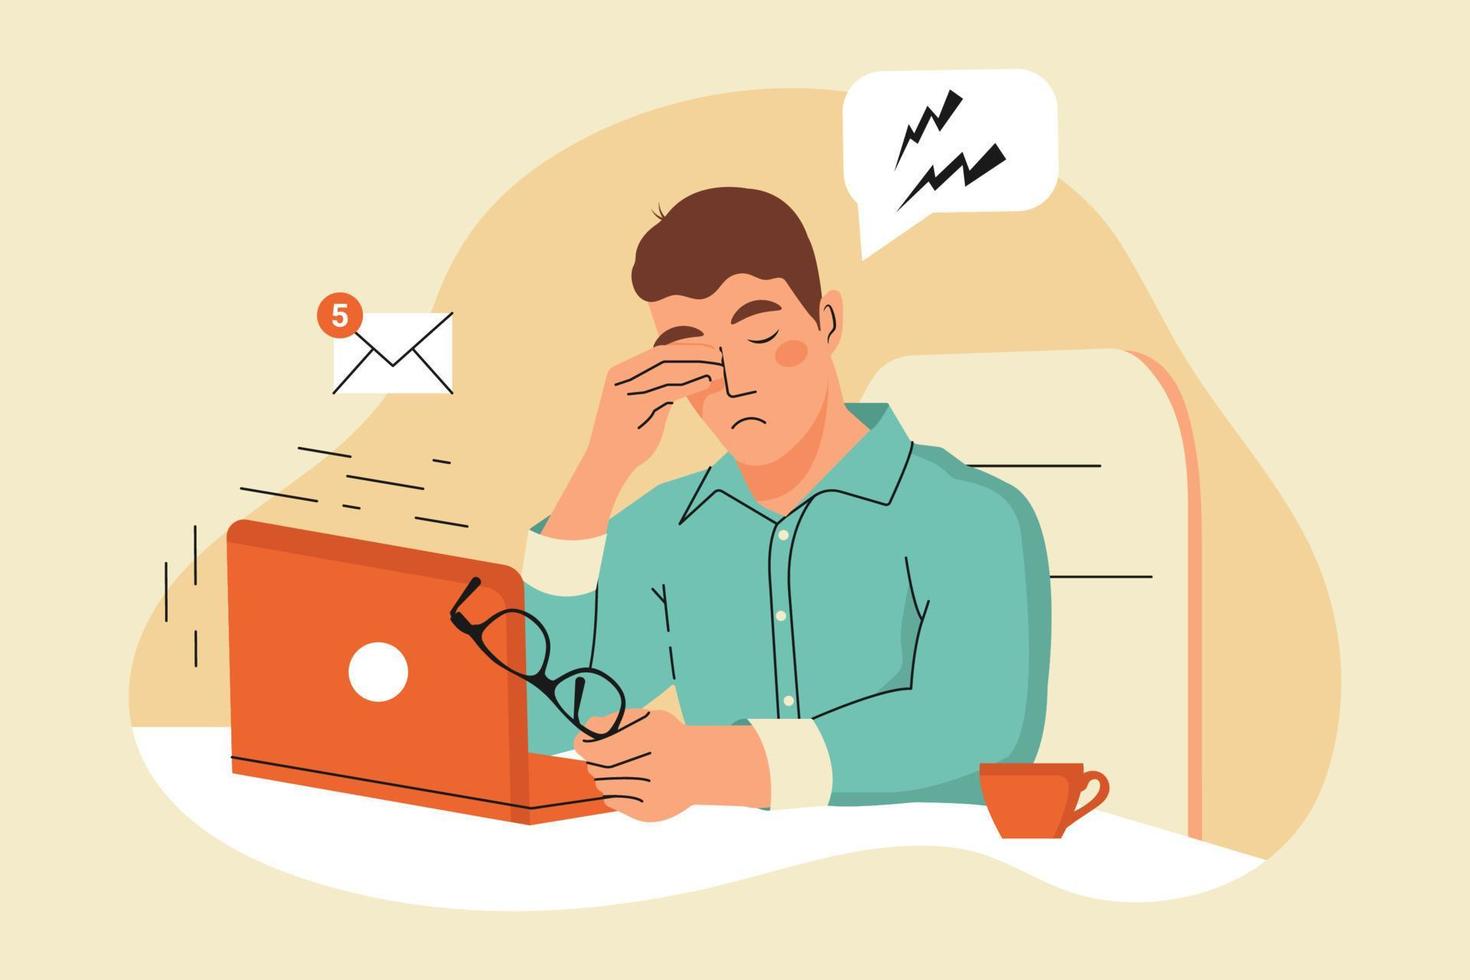 Young guy is working on a Laptop. Tired character. Concept of Eye Health while Working at the computer. Flat vector illustration.